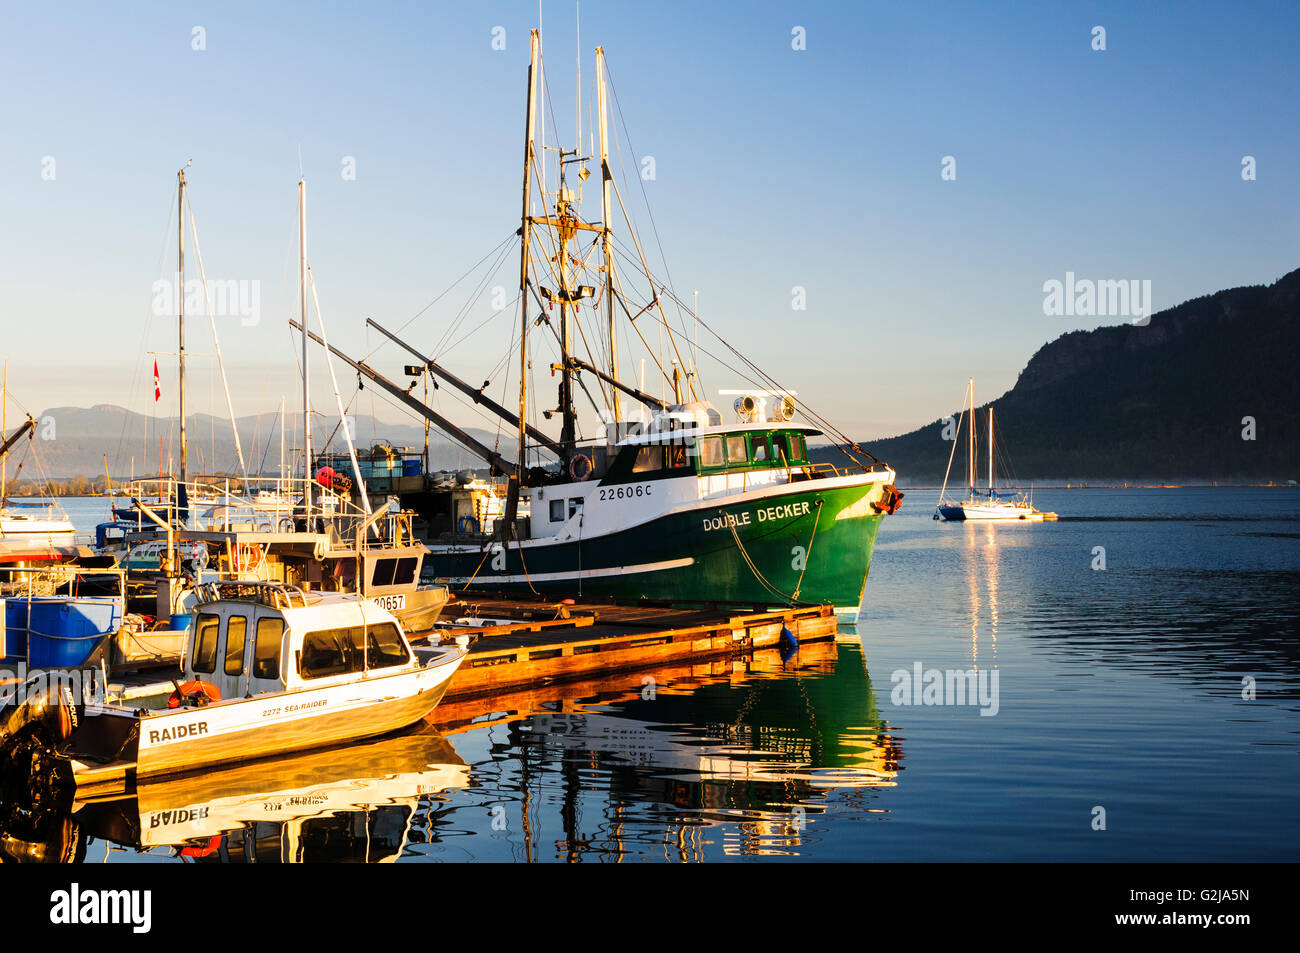 The fishing vessel, Double Decker, moored in Cowichan Bay near Duncan, British Columbia. Stock Photo